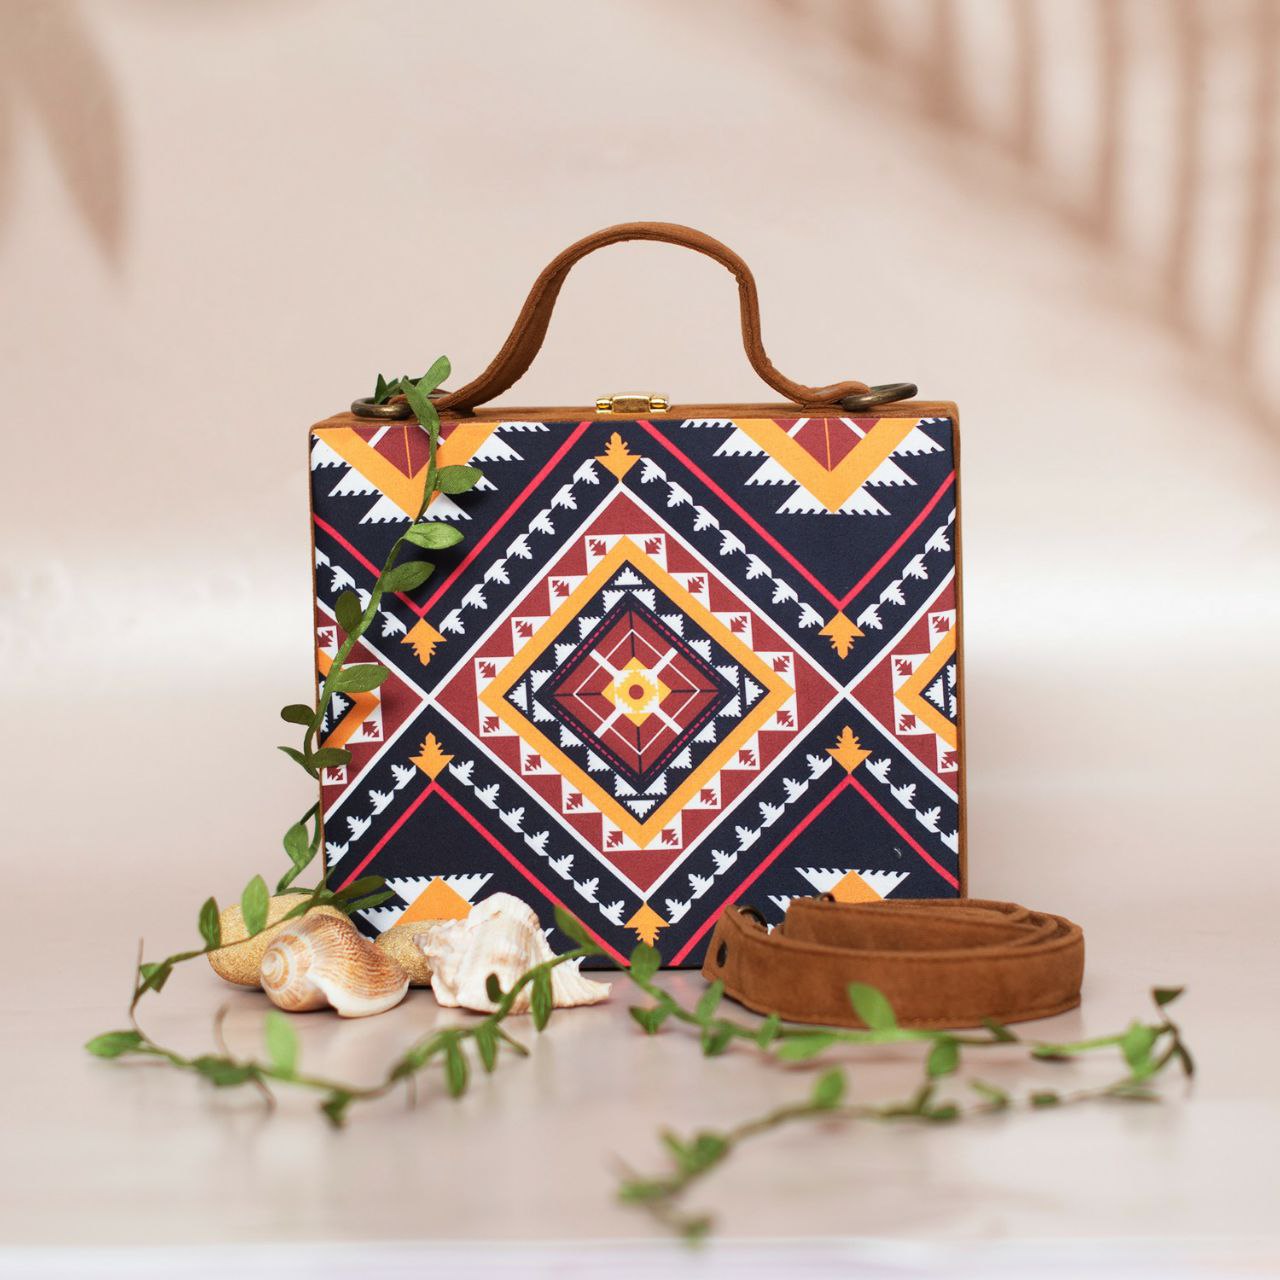 Printed Suitcase Style Bag